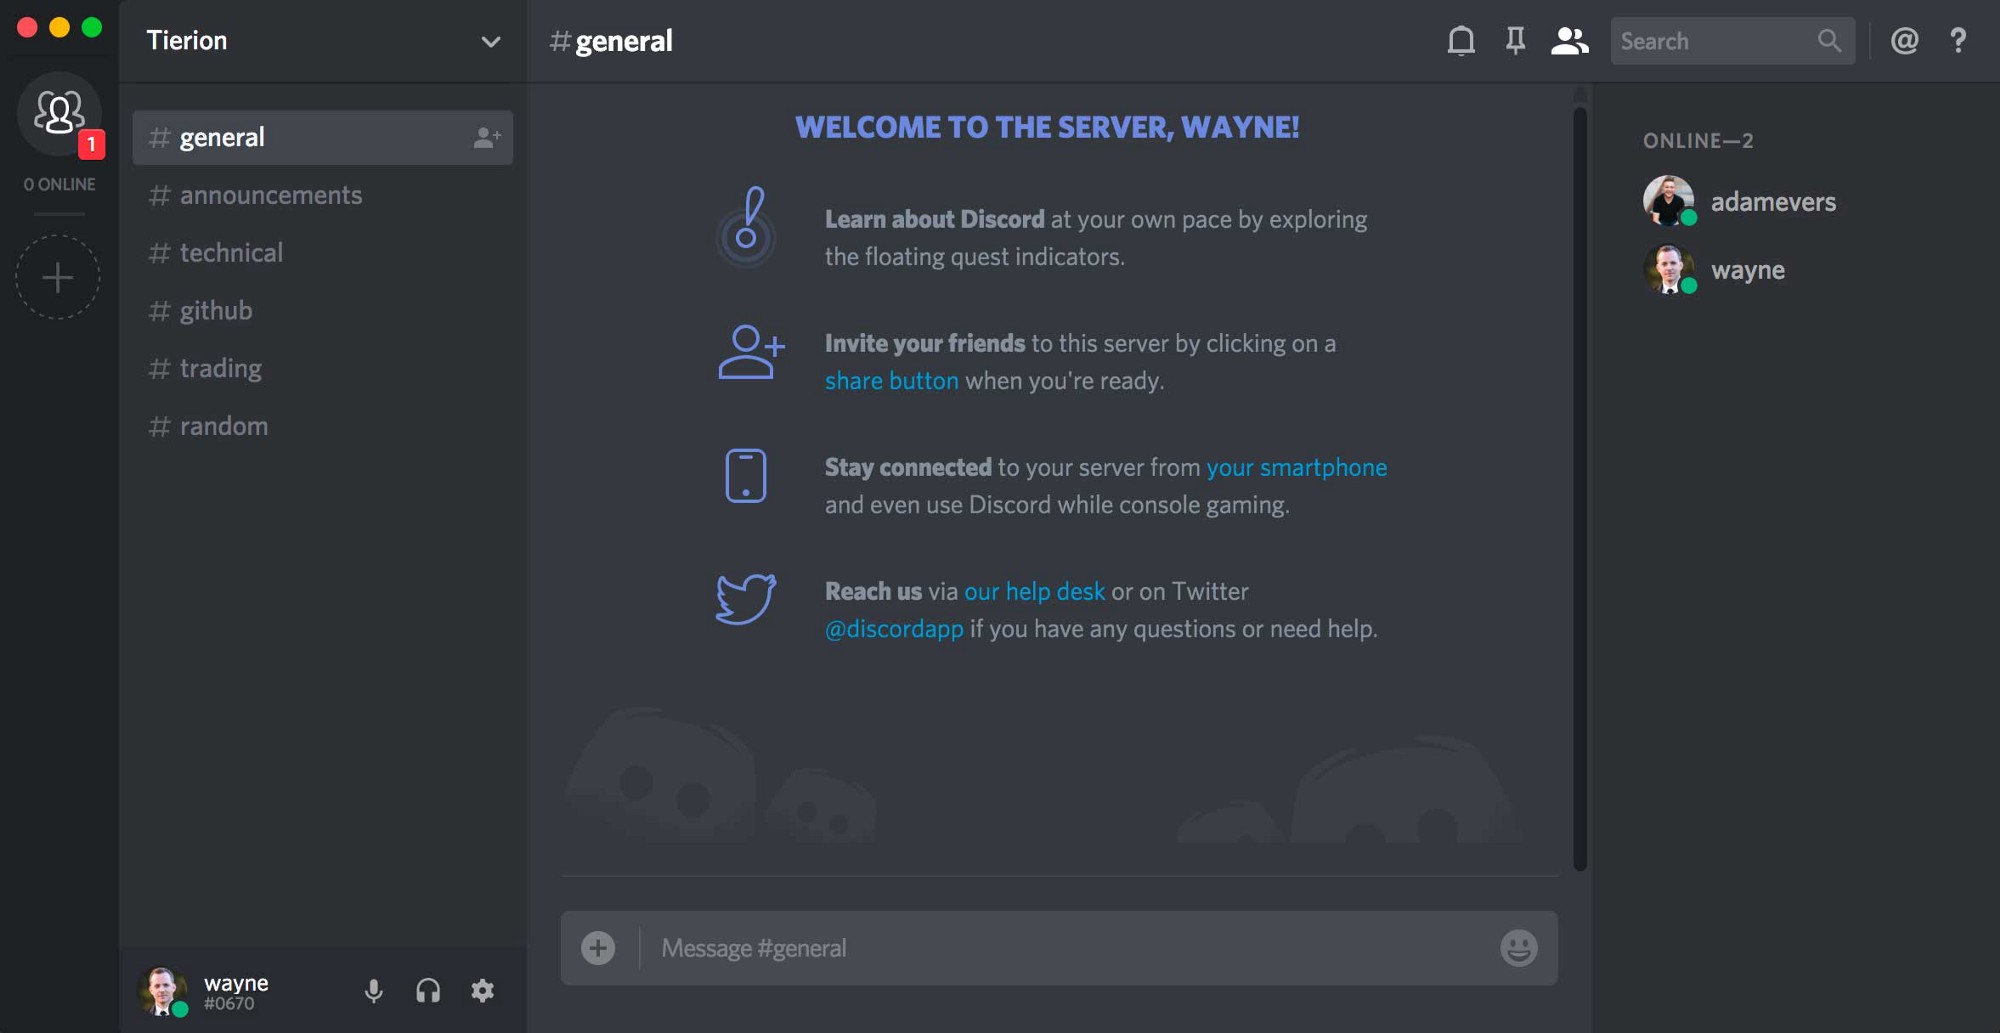 Tierion’s Discord community is now live.